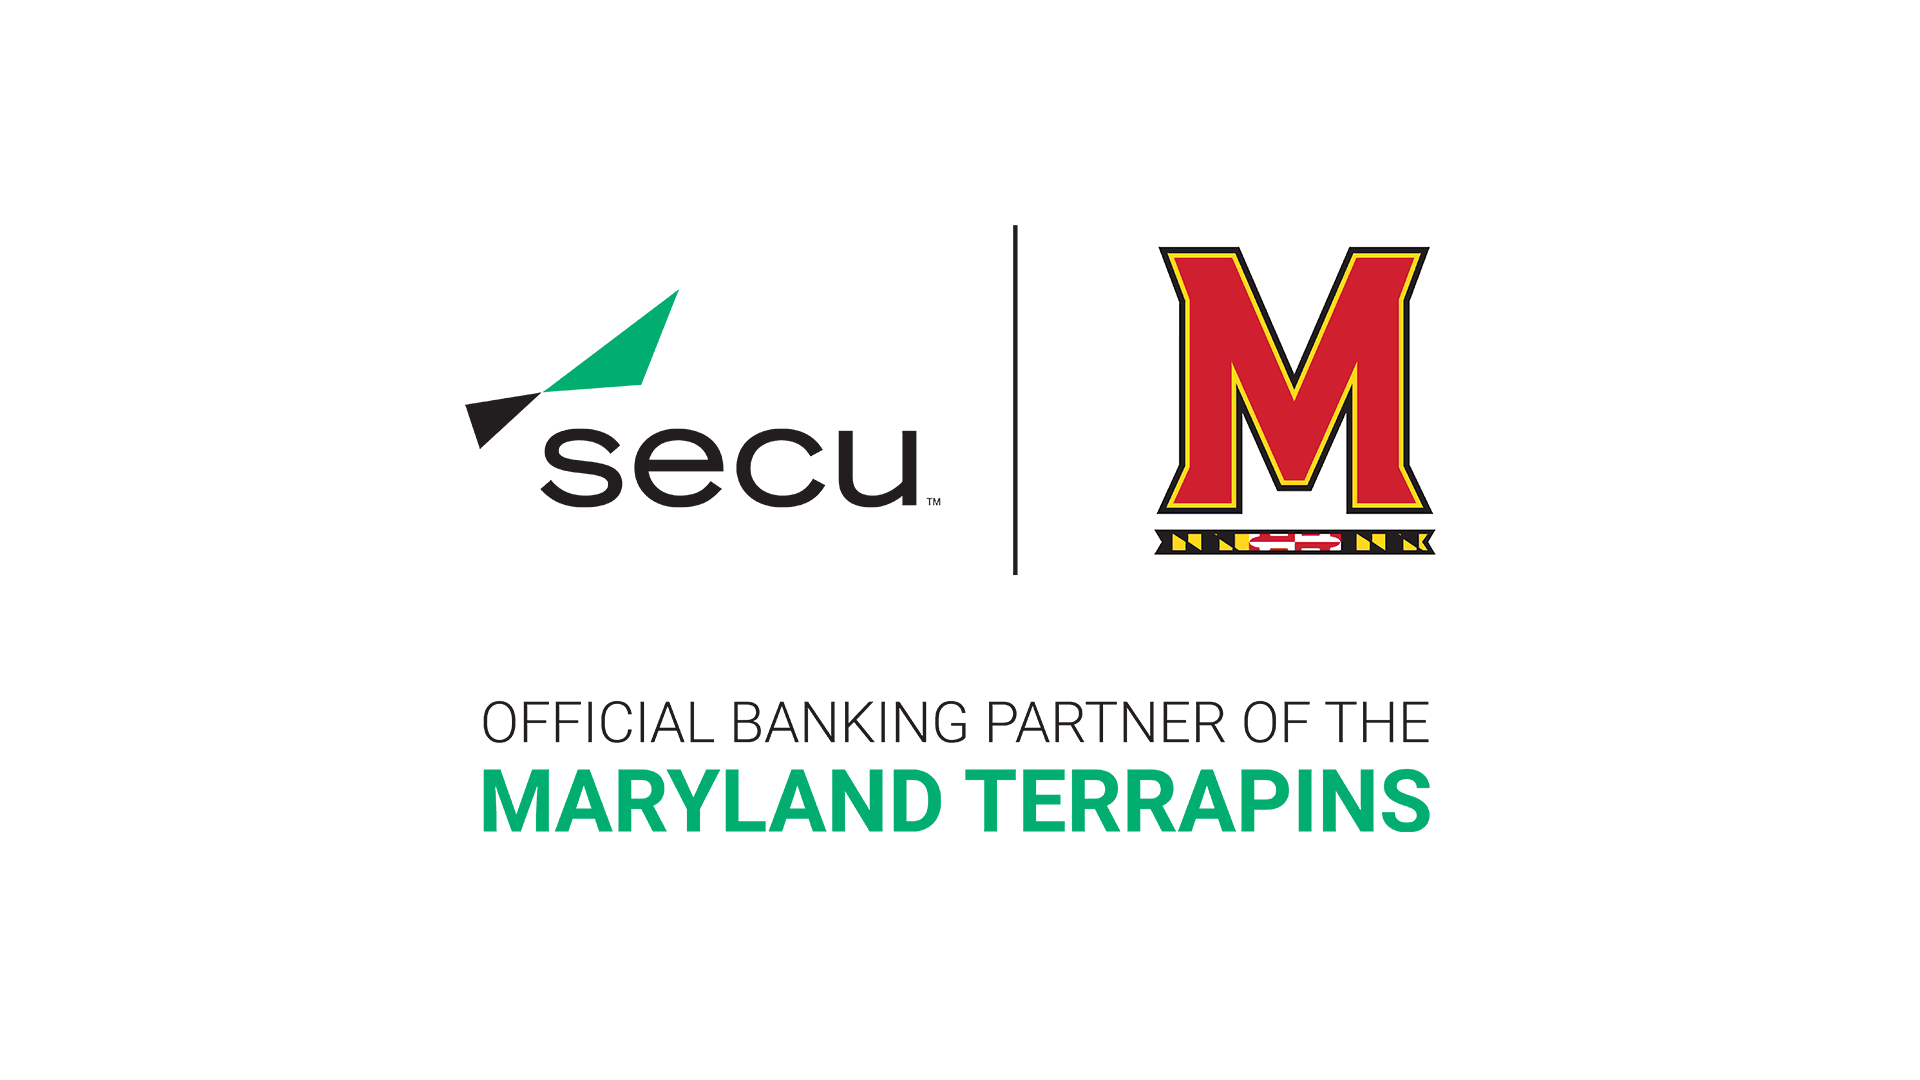 Logos Maryland Athletics and SECU, the official banking partner of the Maryland Terrapins.